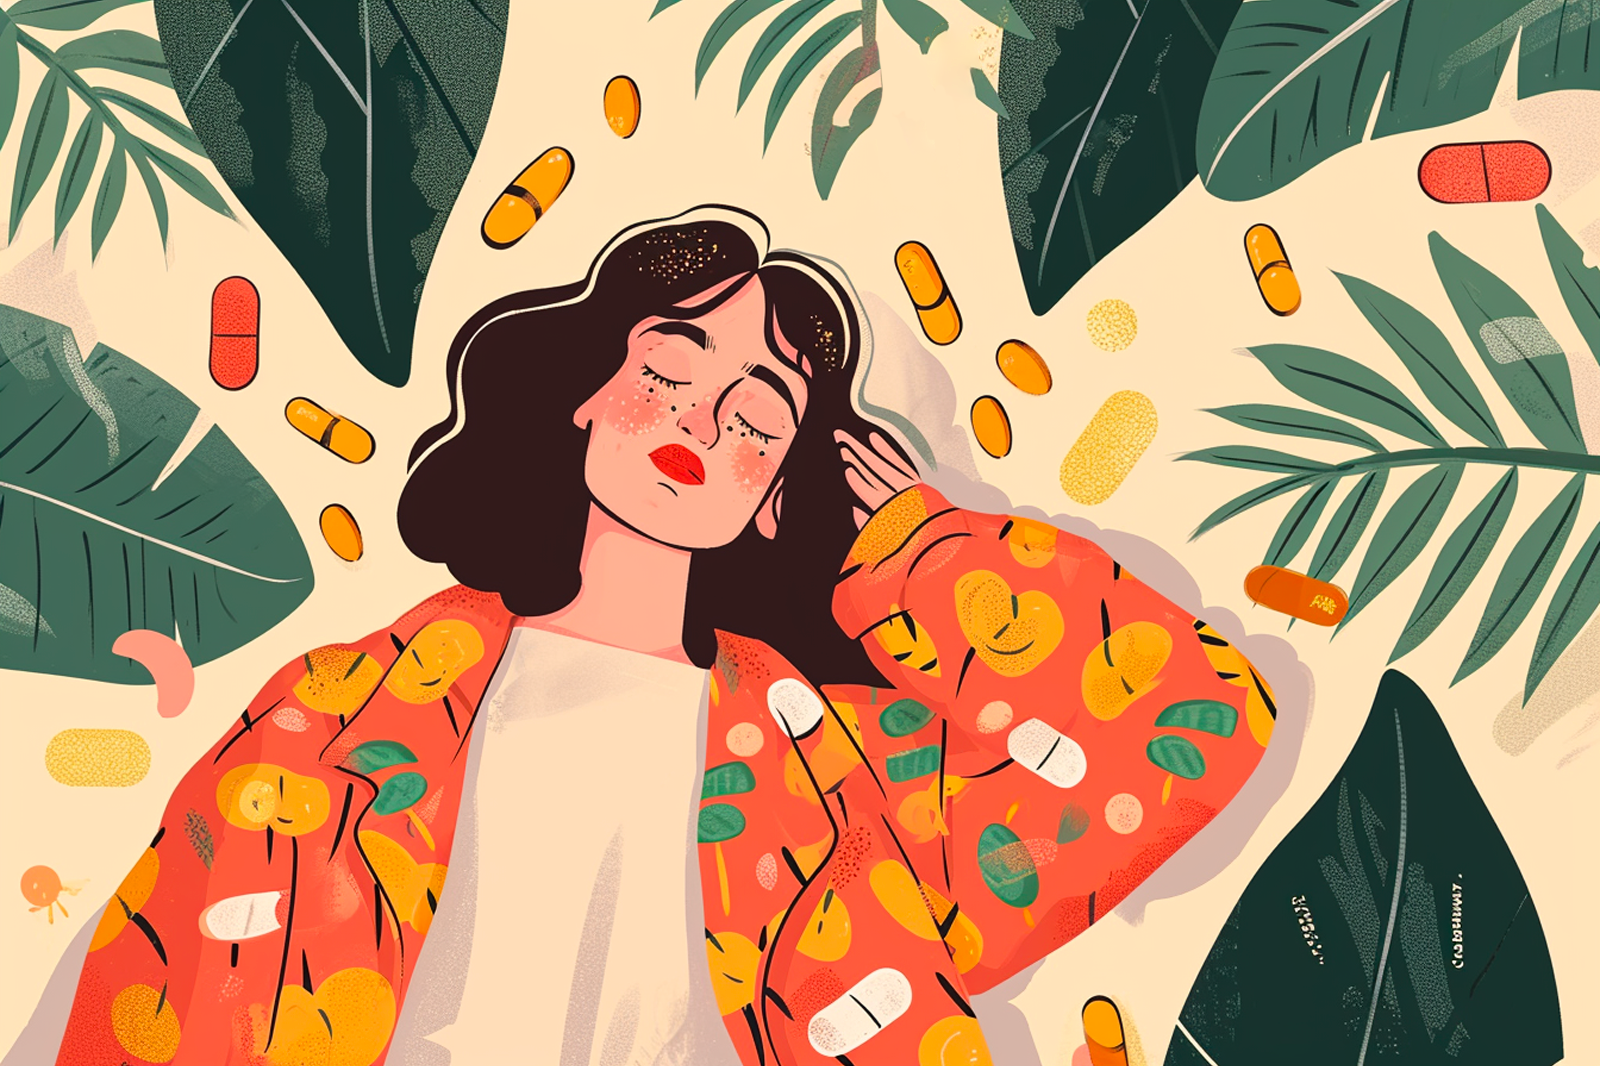 Woman stressed, surrounded by vitamins and plants in a painted image